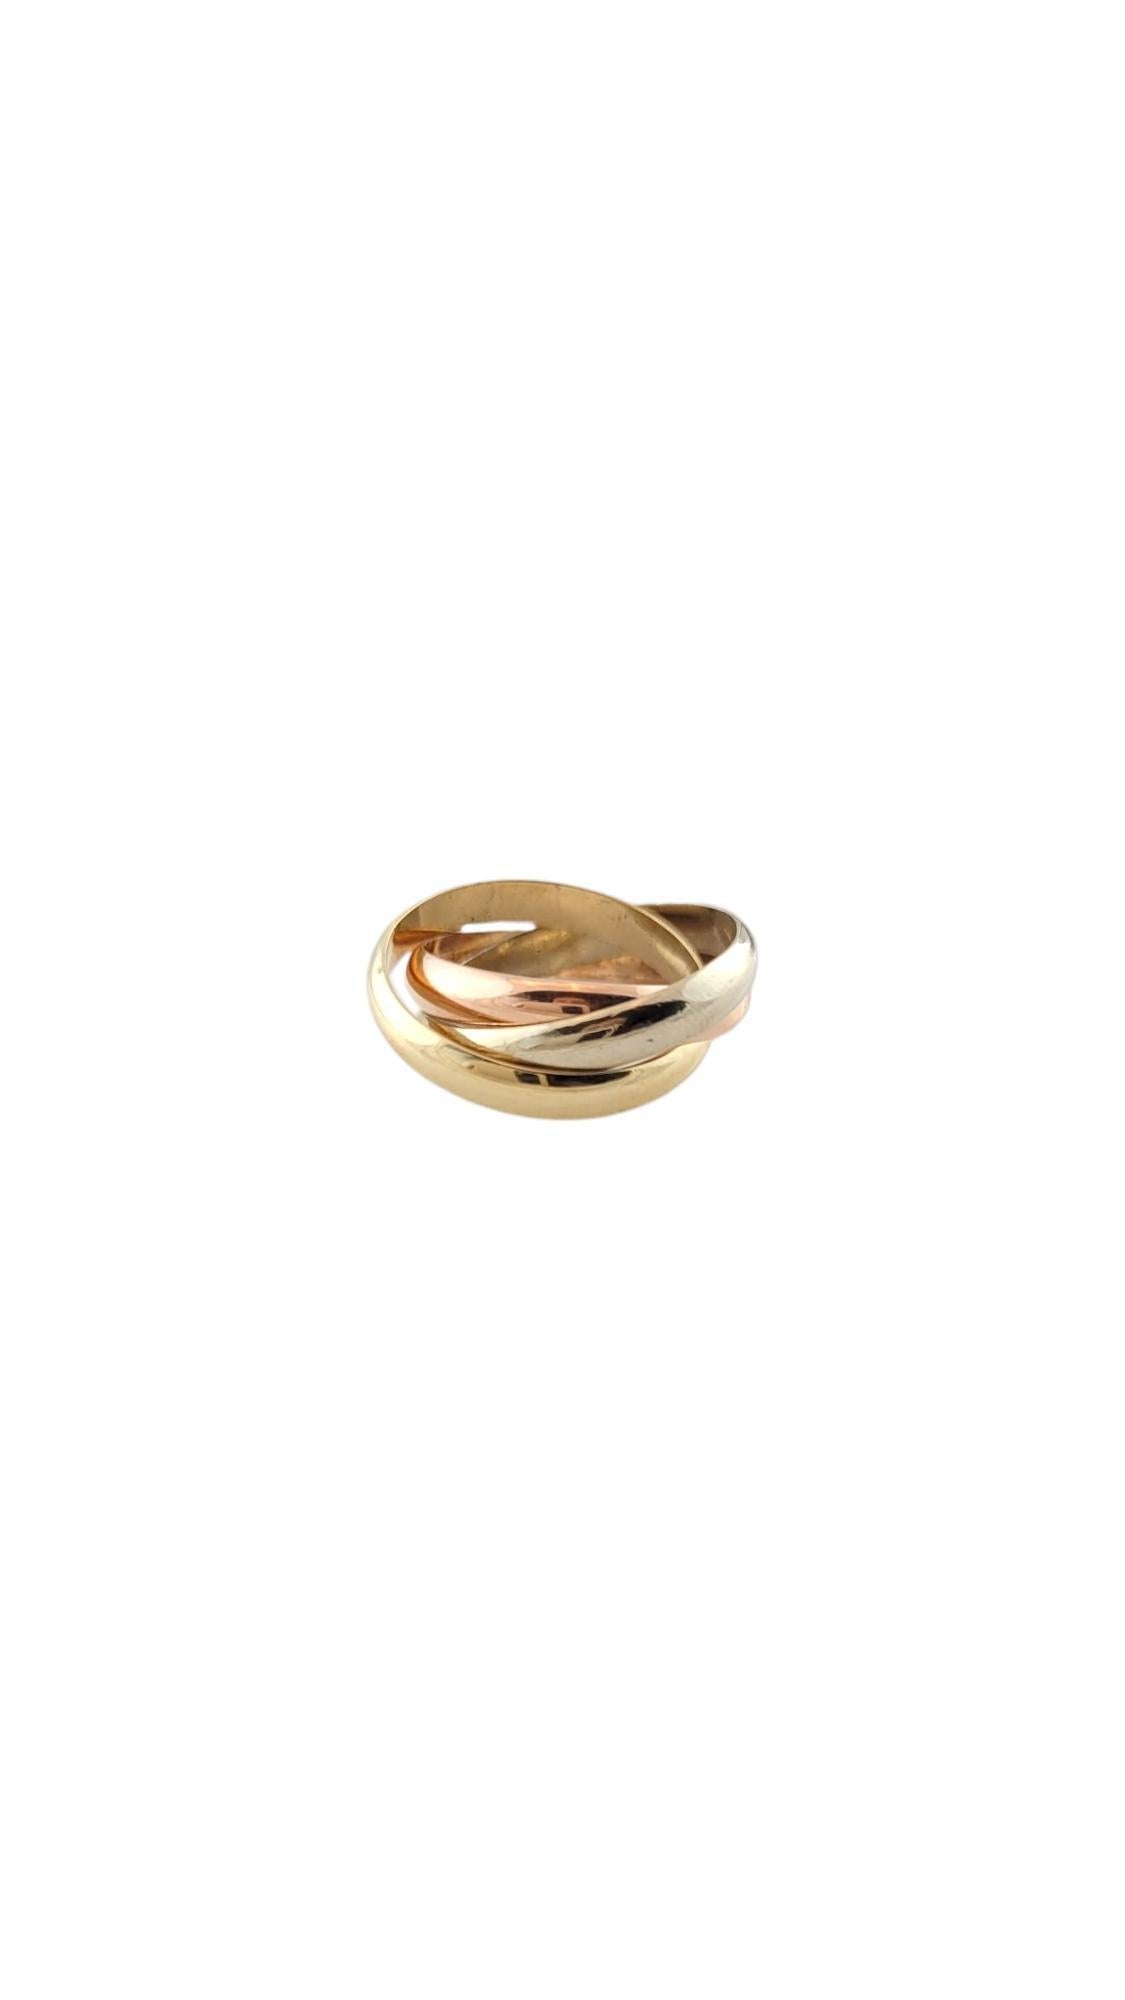 14K Tri-Color 3 Band Rolling Ring

Make a statement with this gorgeous ring that features 3 rolling bands of white, gold and rose gold. 

Ring Size: 5.75

Each band is approx. 3mm wide

Stamped: 14K 585 YL  

Weight: 4.5 dwt./ 7.0 gr.

Very good